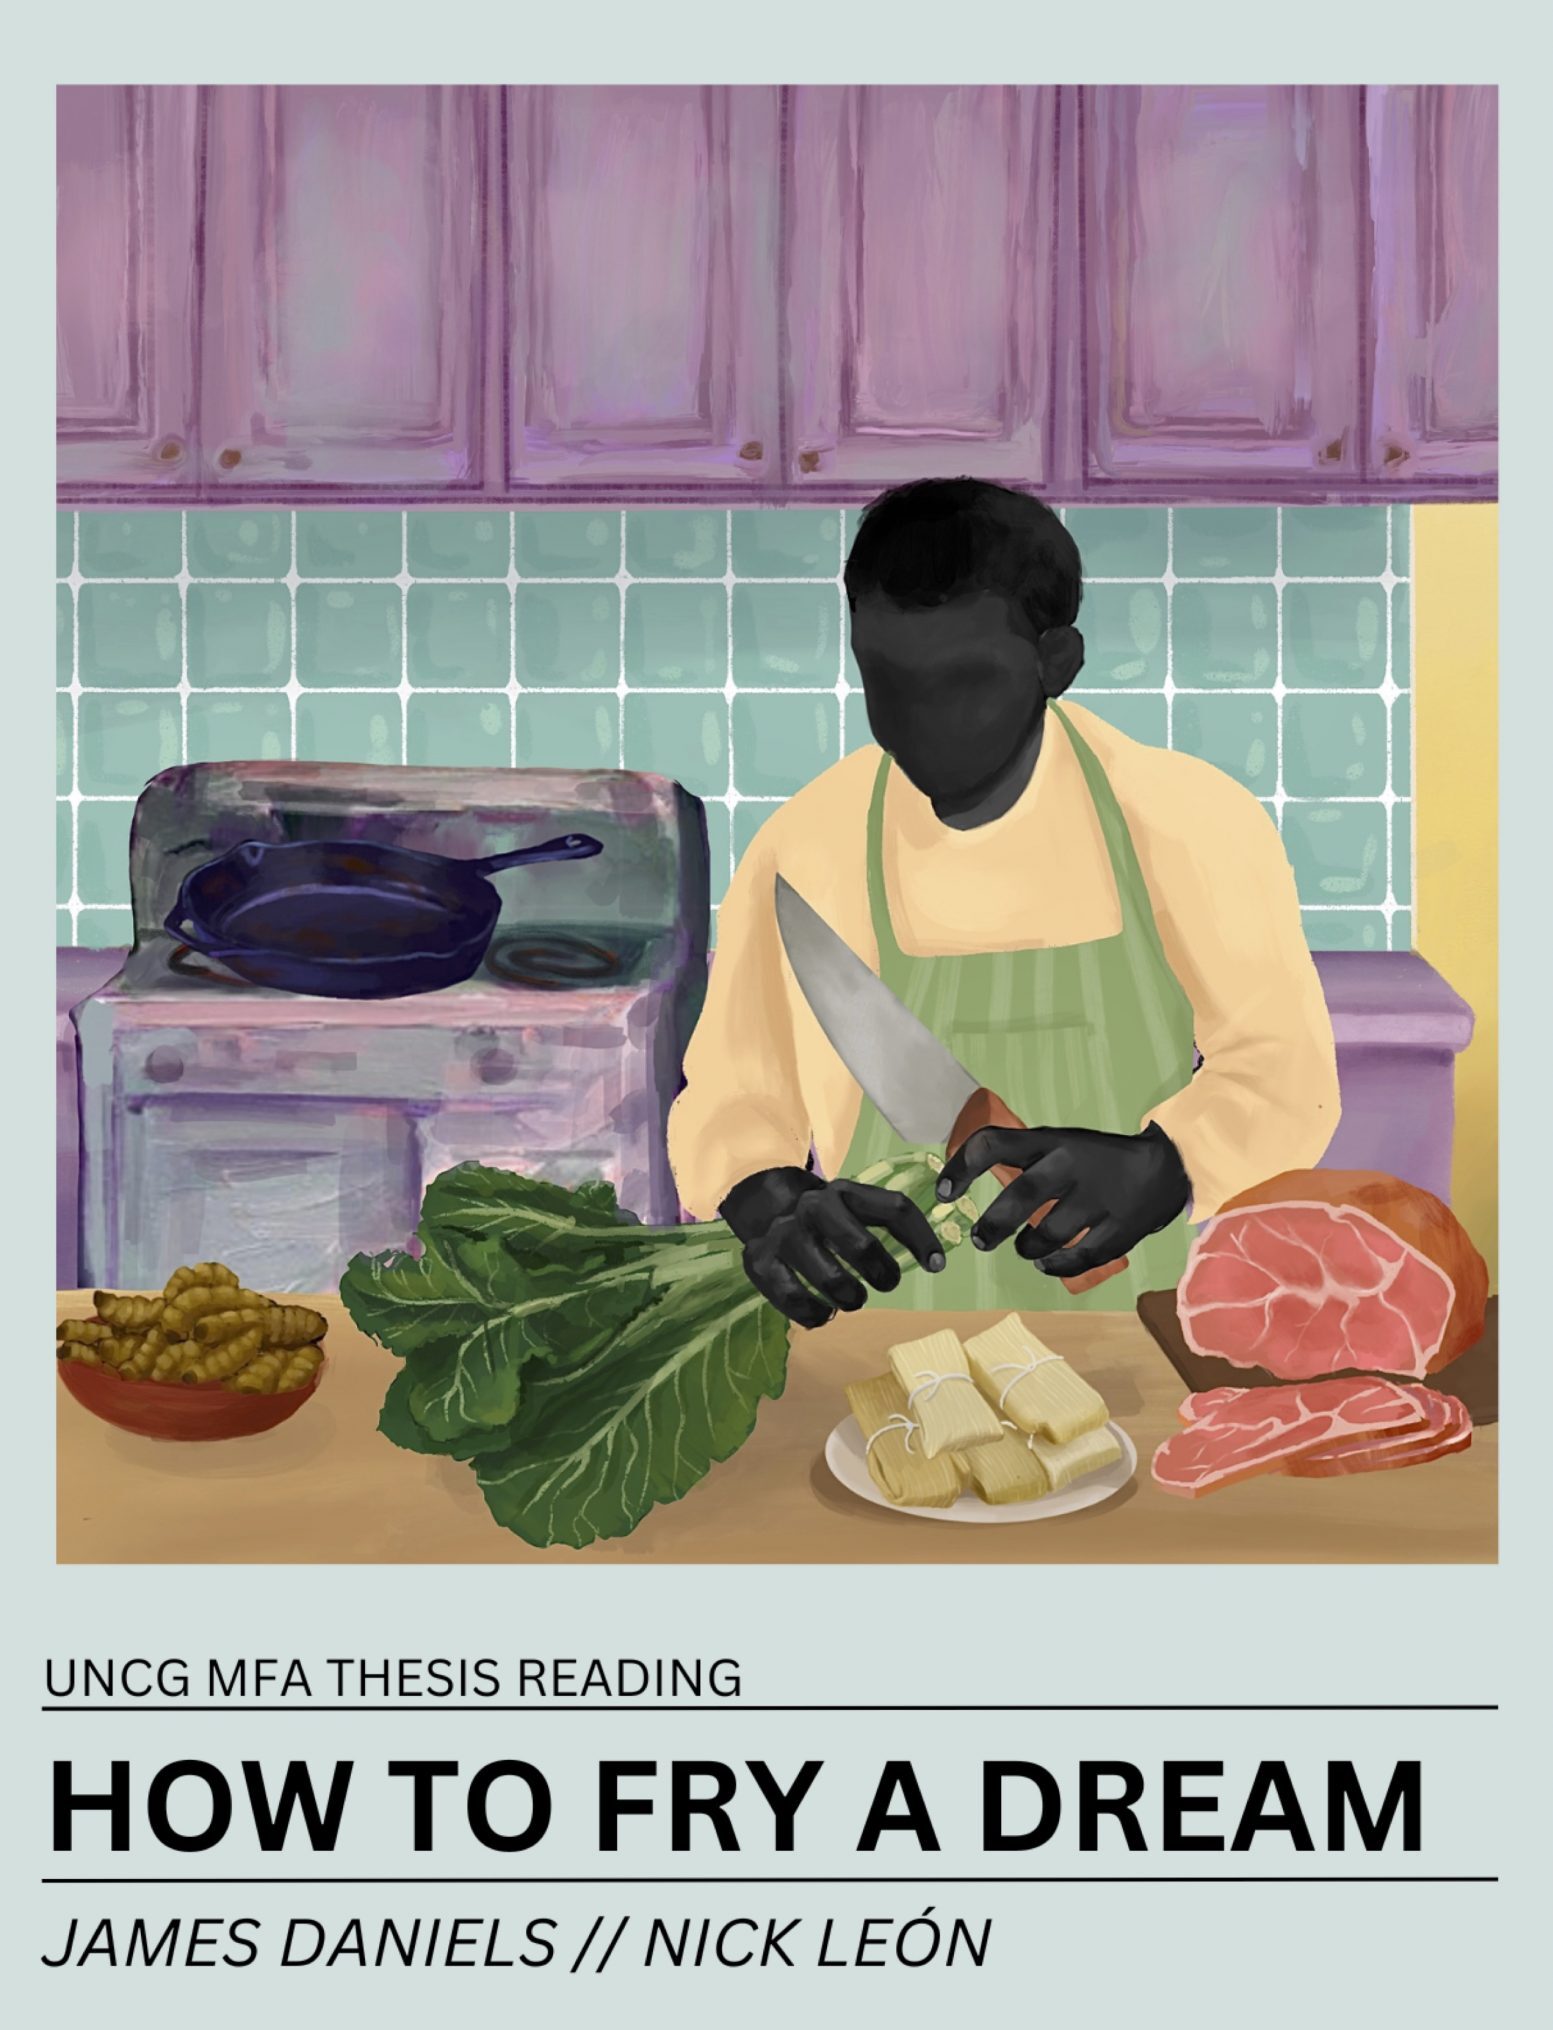 How to Fry a Dream poster